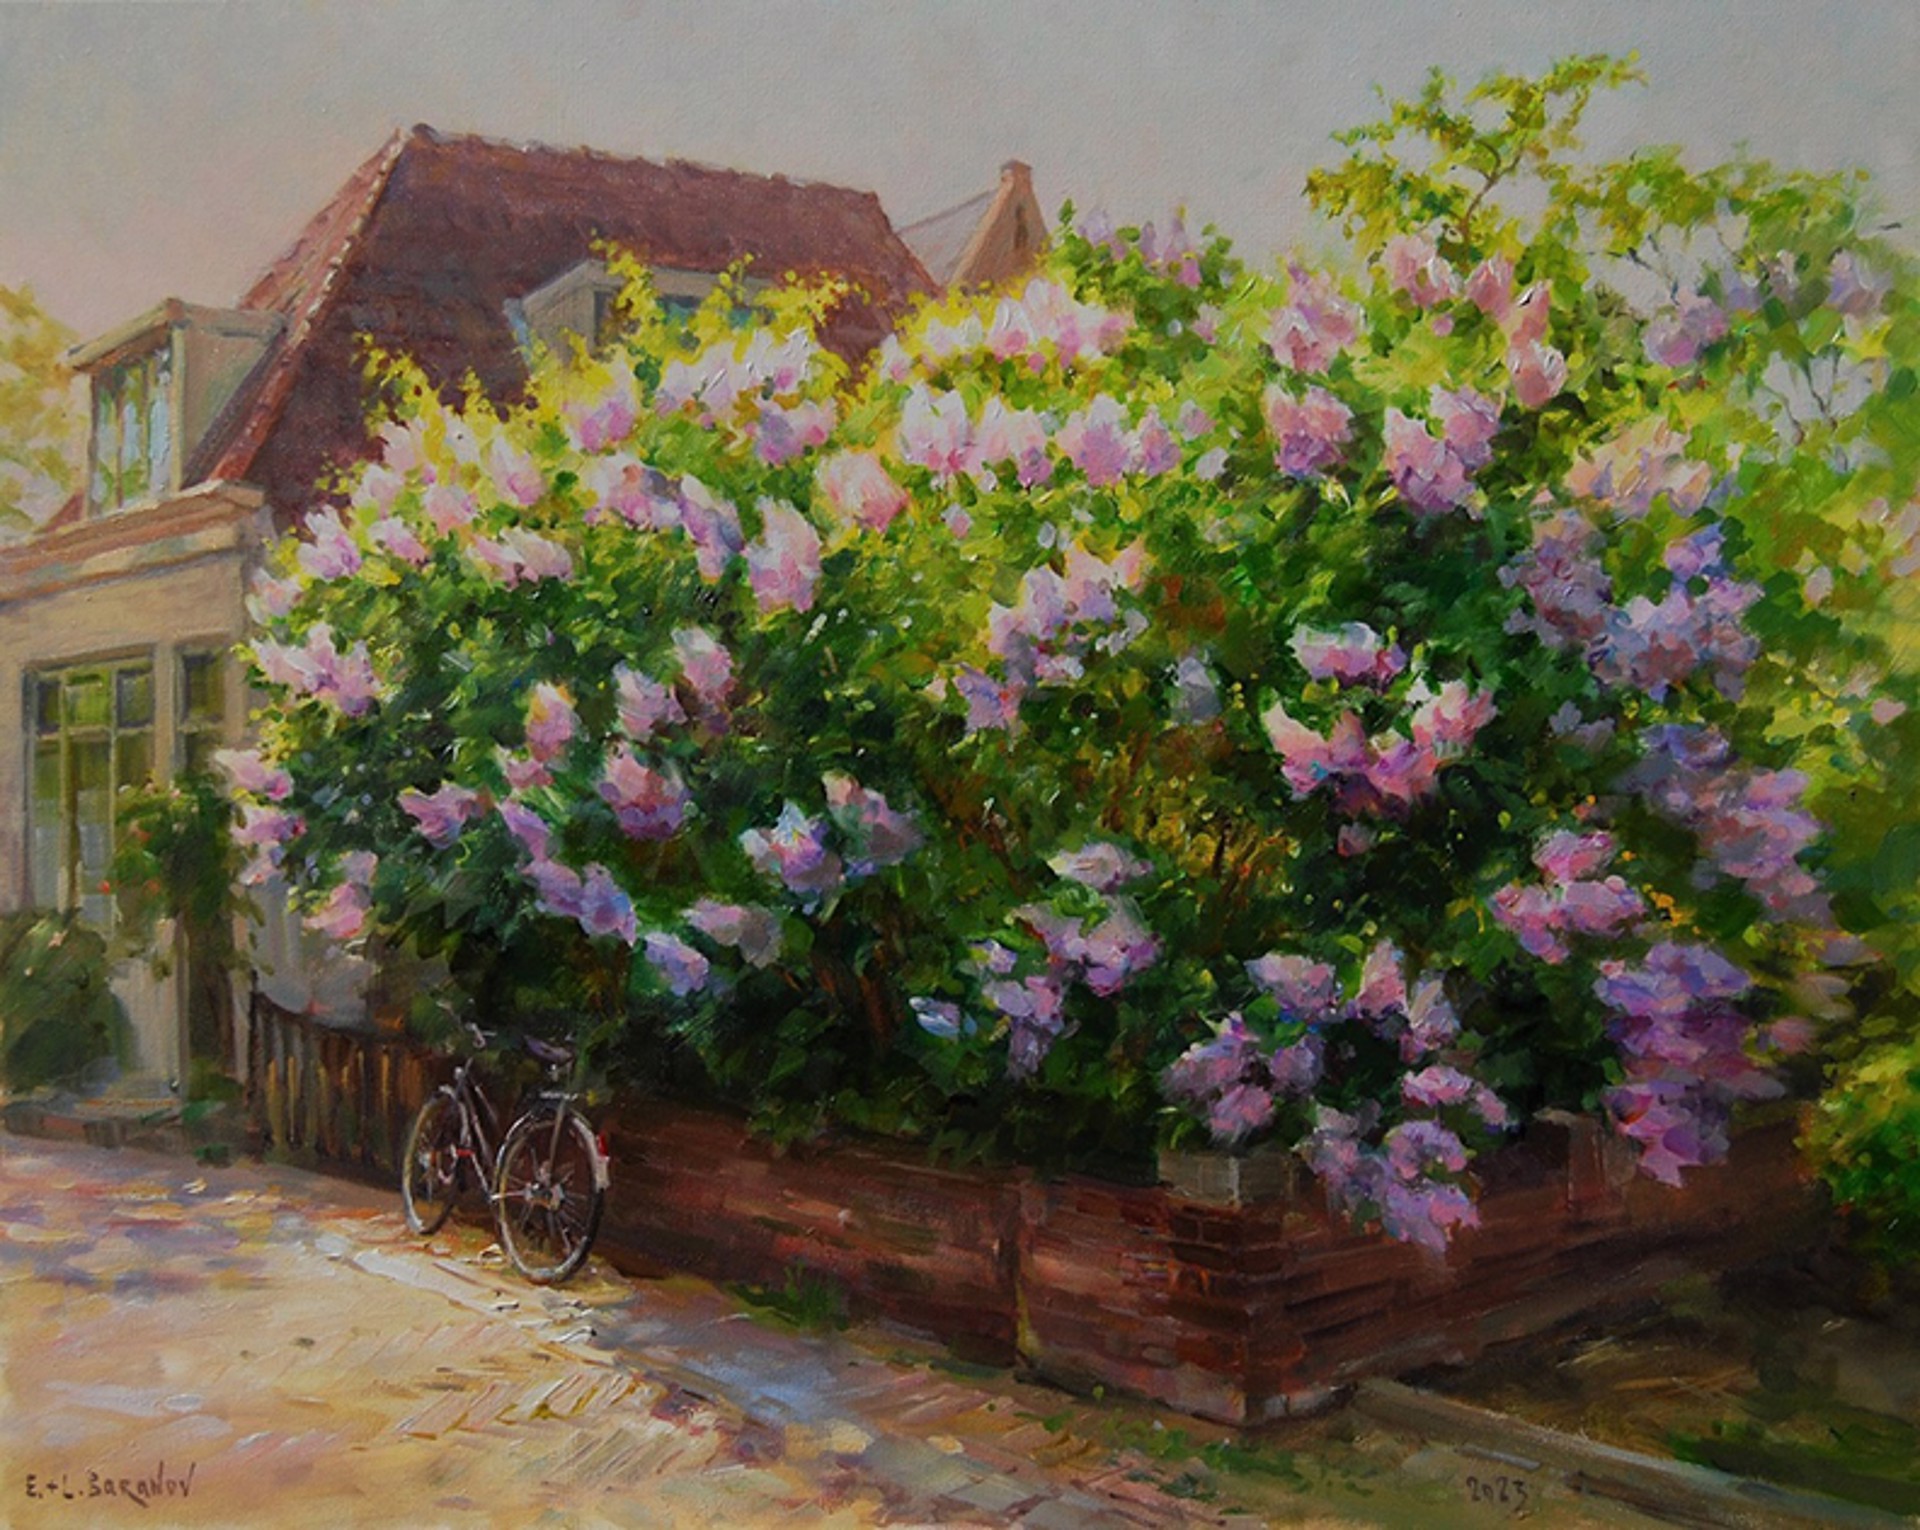 Lilacs in Bloom, North Holland by Evgeny & Lydia Baranov